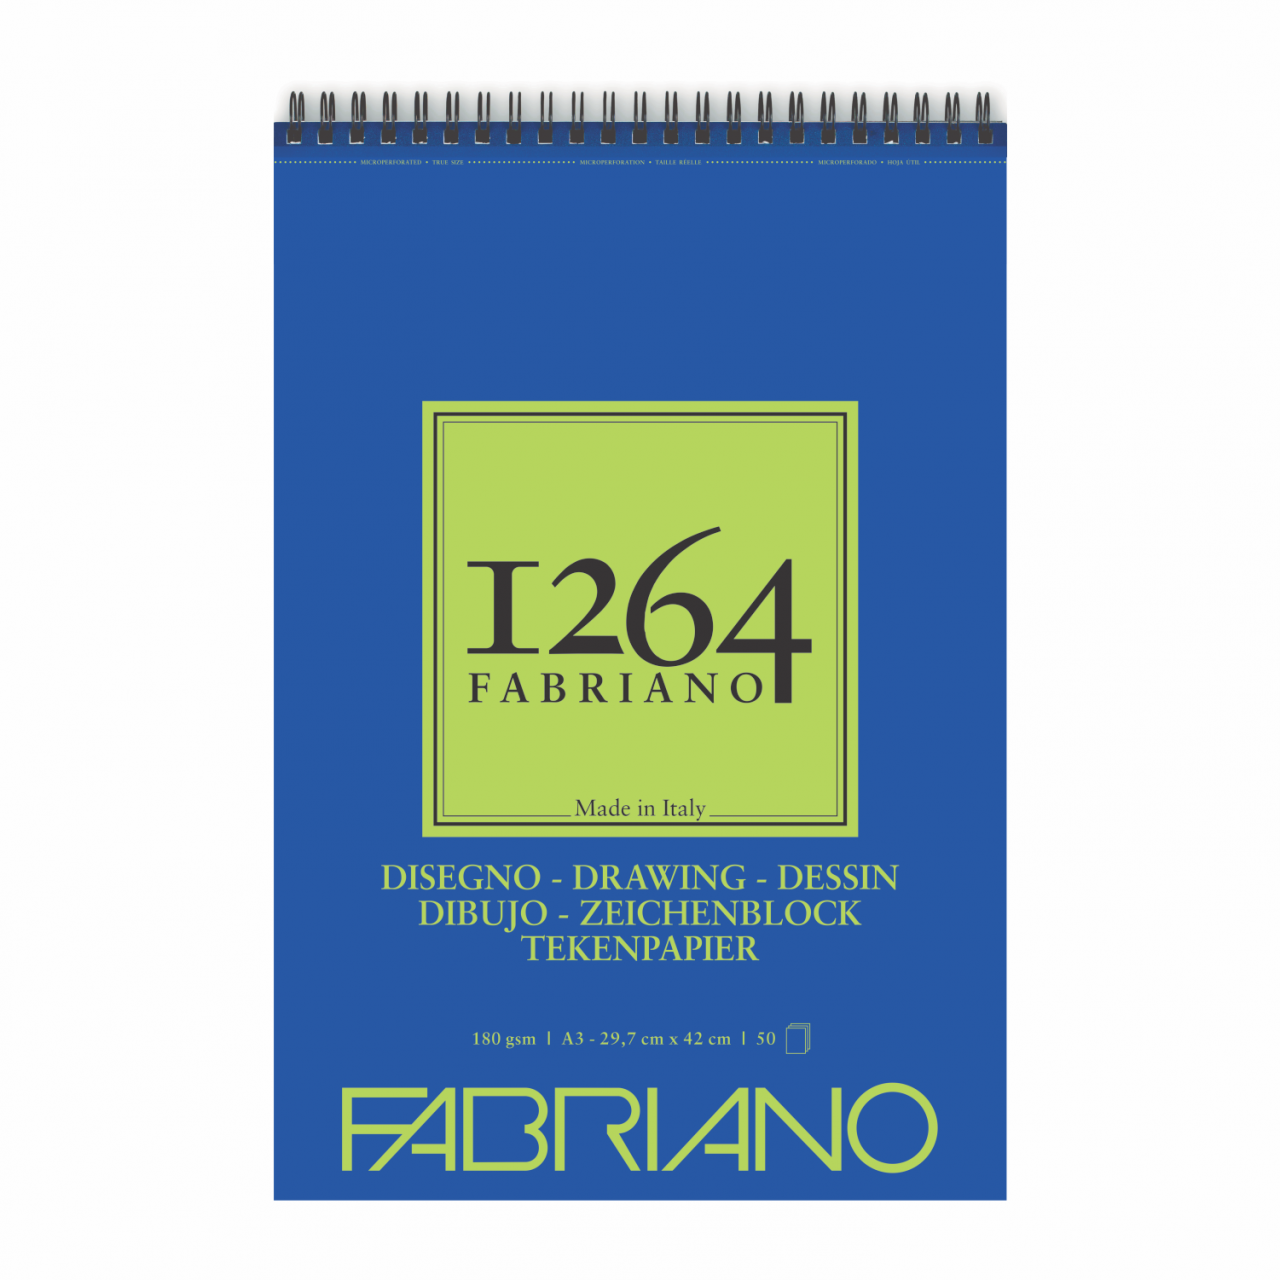 BLOCK DRAWING PAPER FABRIANO 1264 A3 180GR